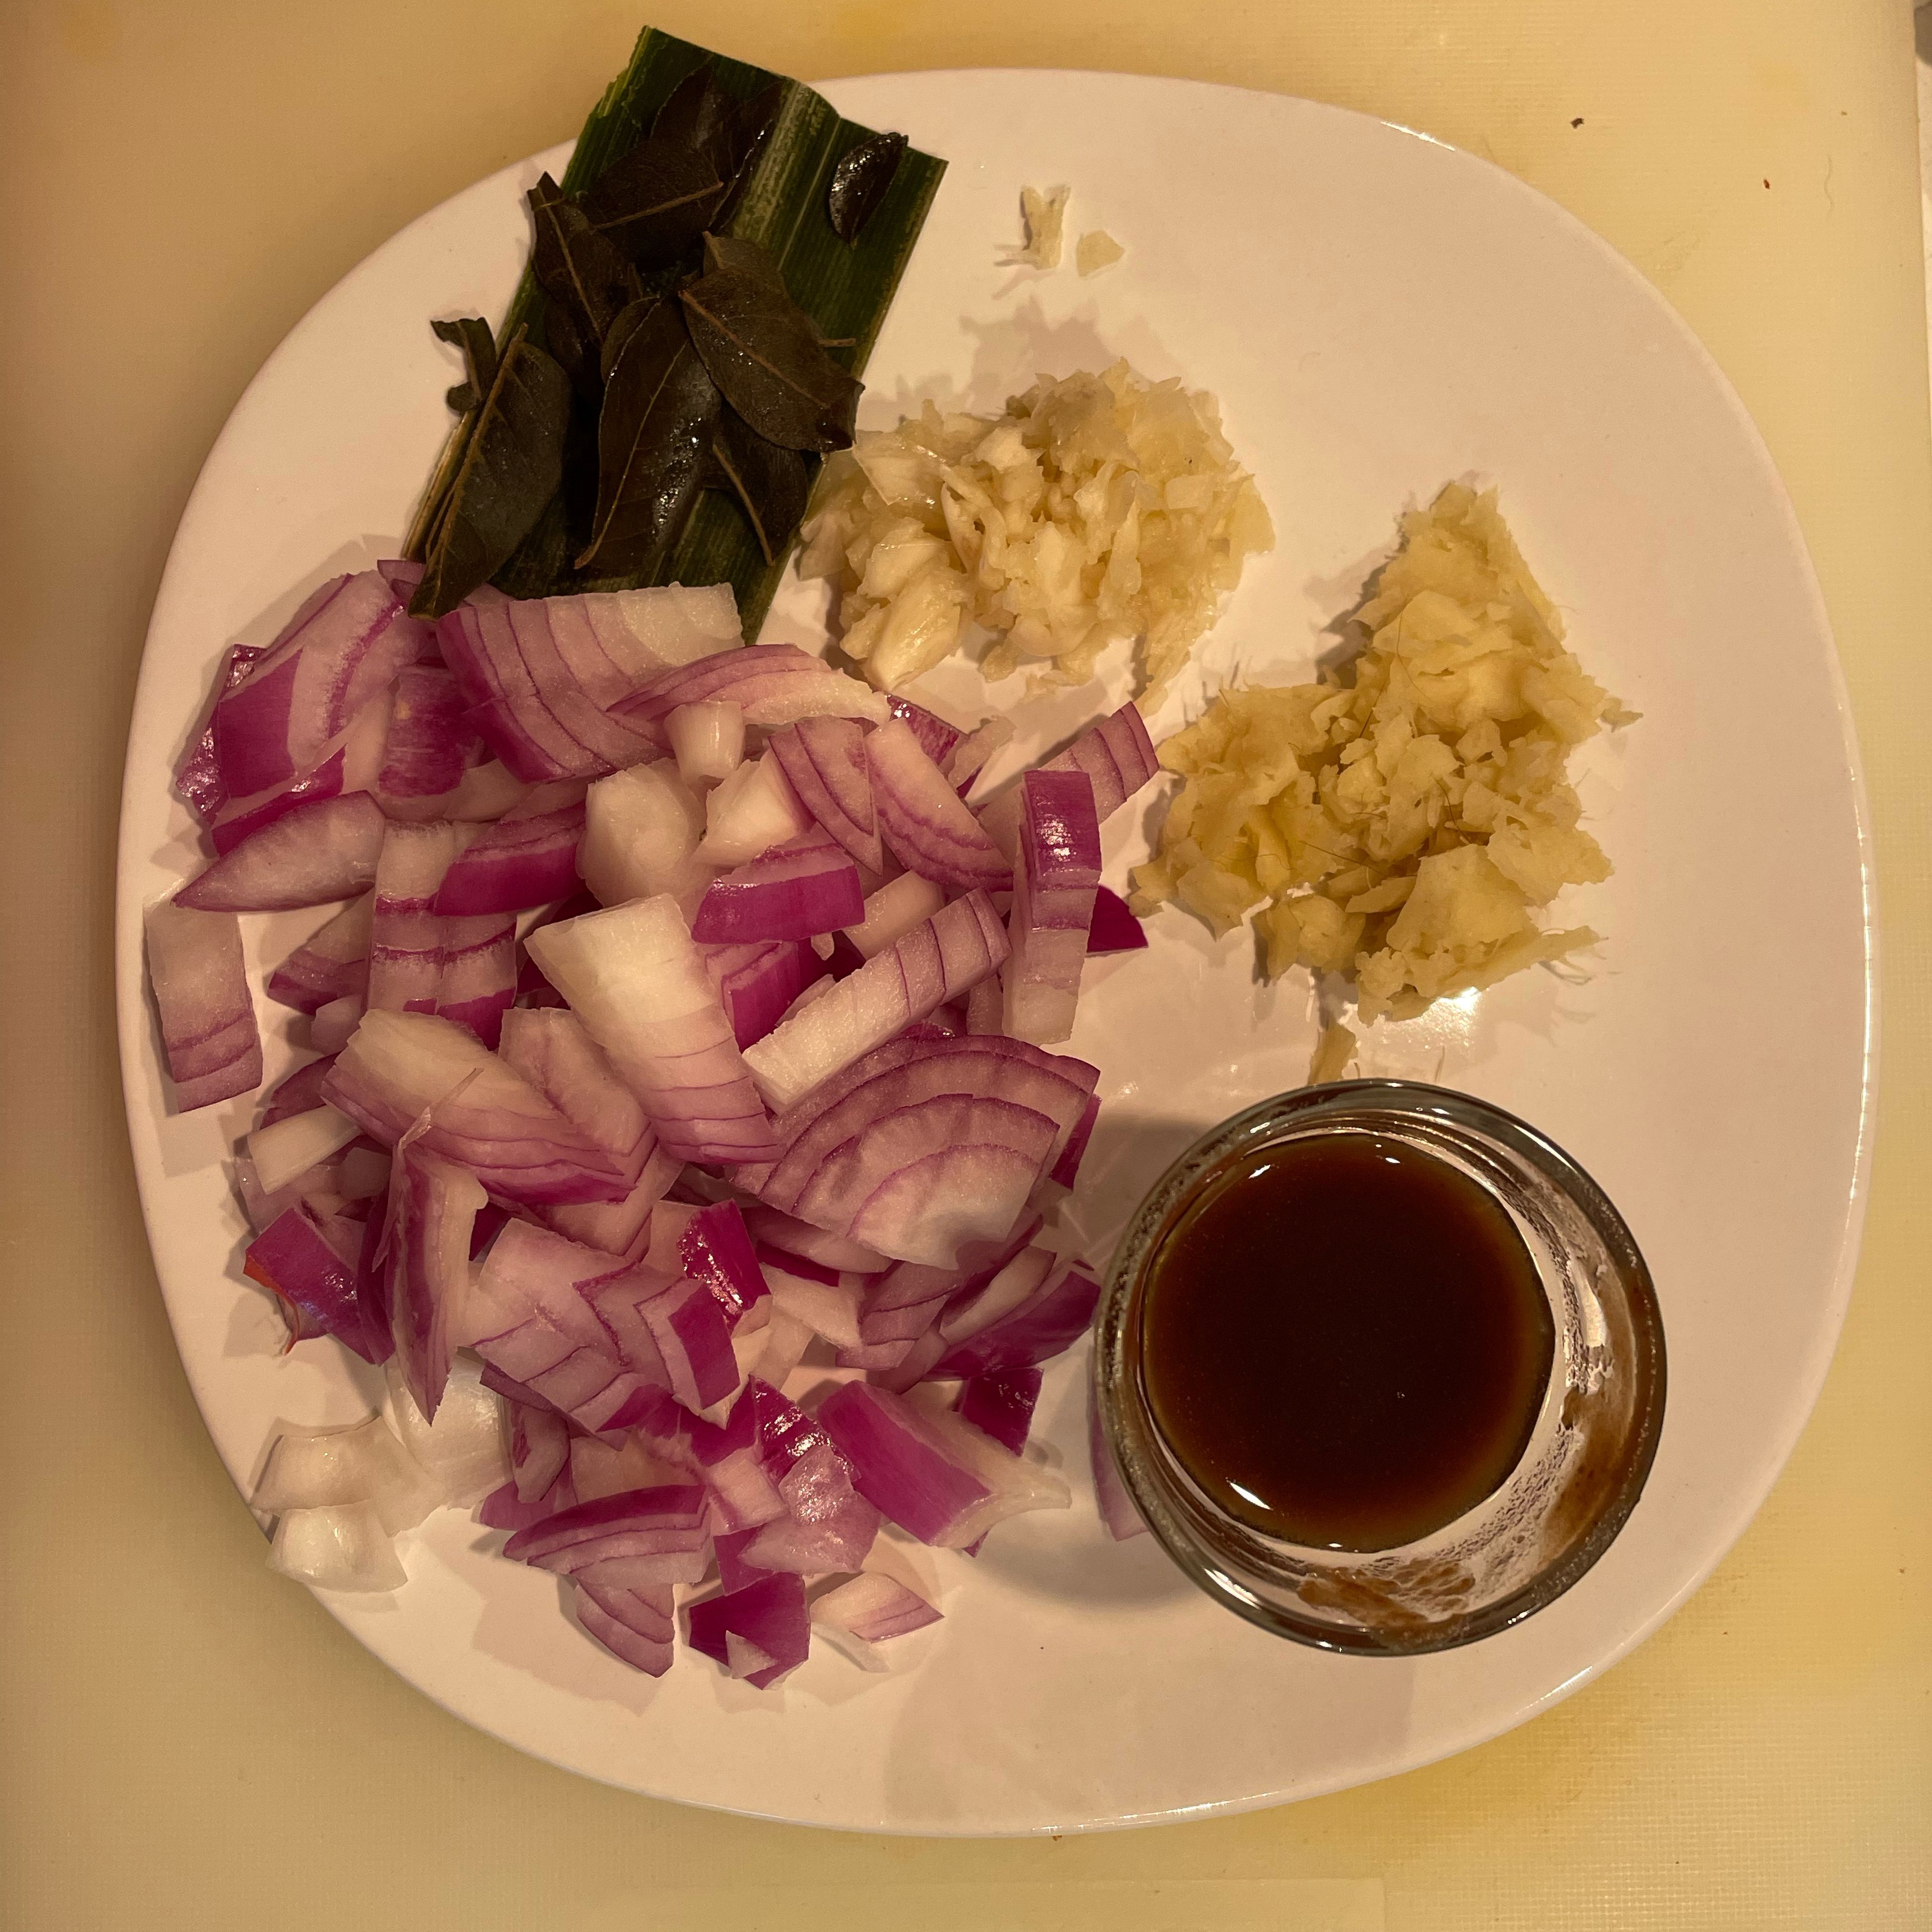 Dice onions, crush ginger and garlic, prepare tamarind juice, pandan leaf and a sprig of curry leaves. Cut beef against the grain.